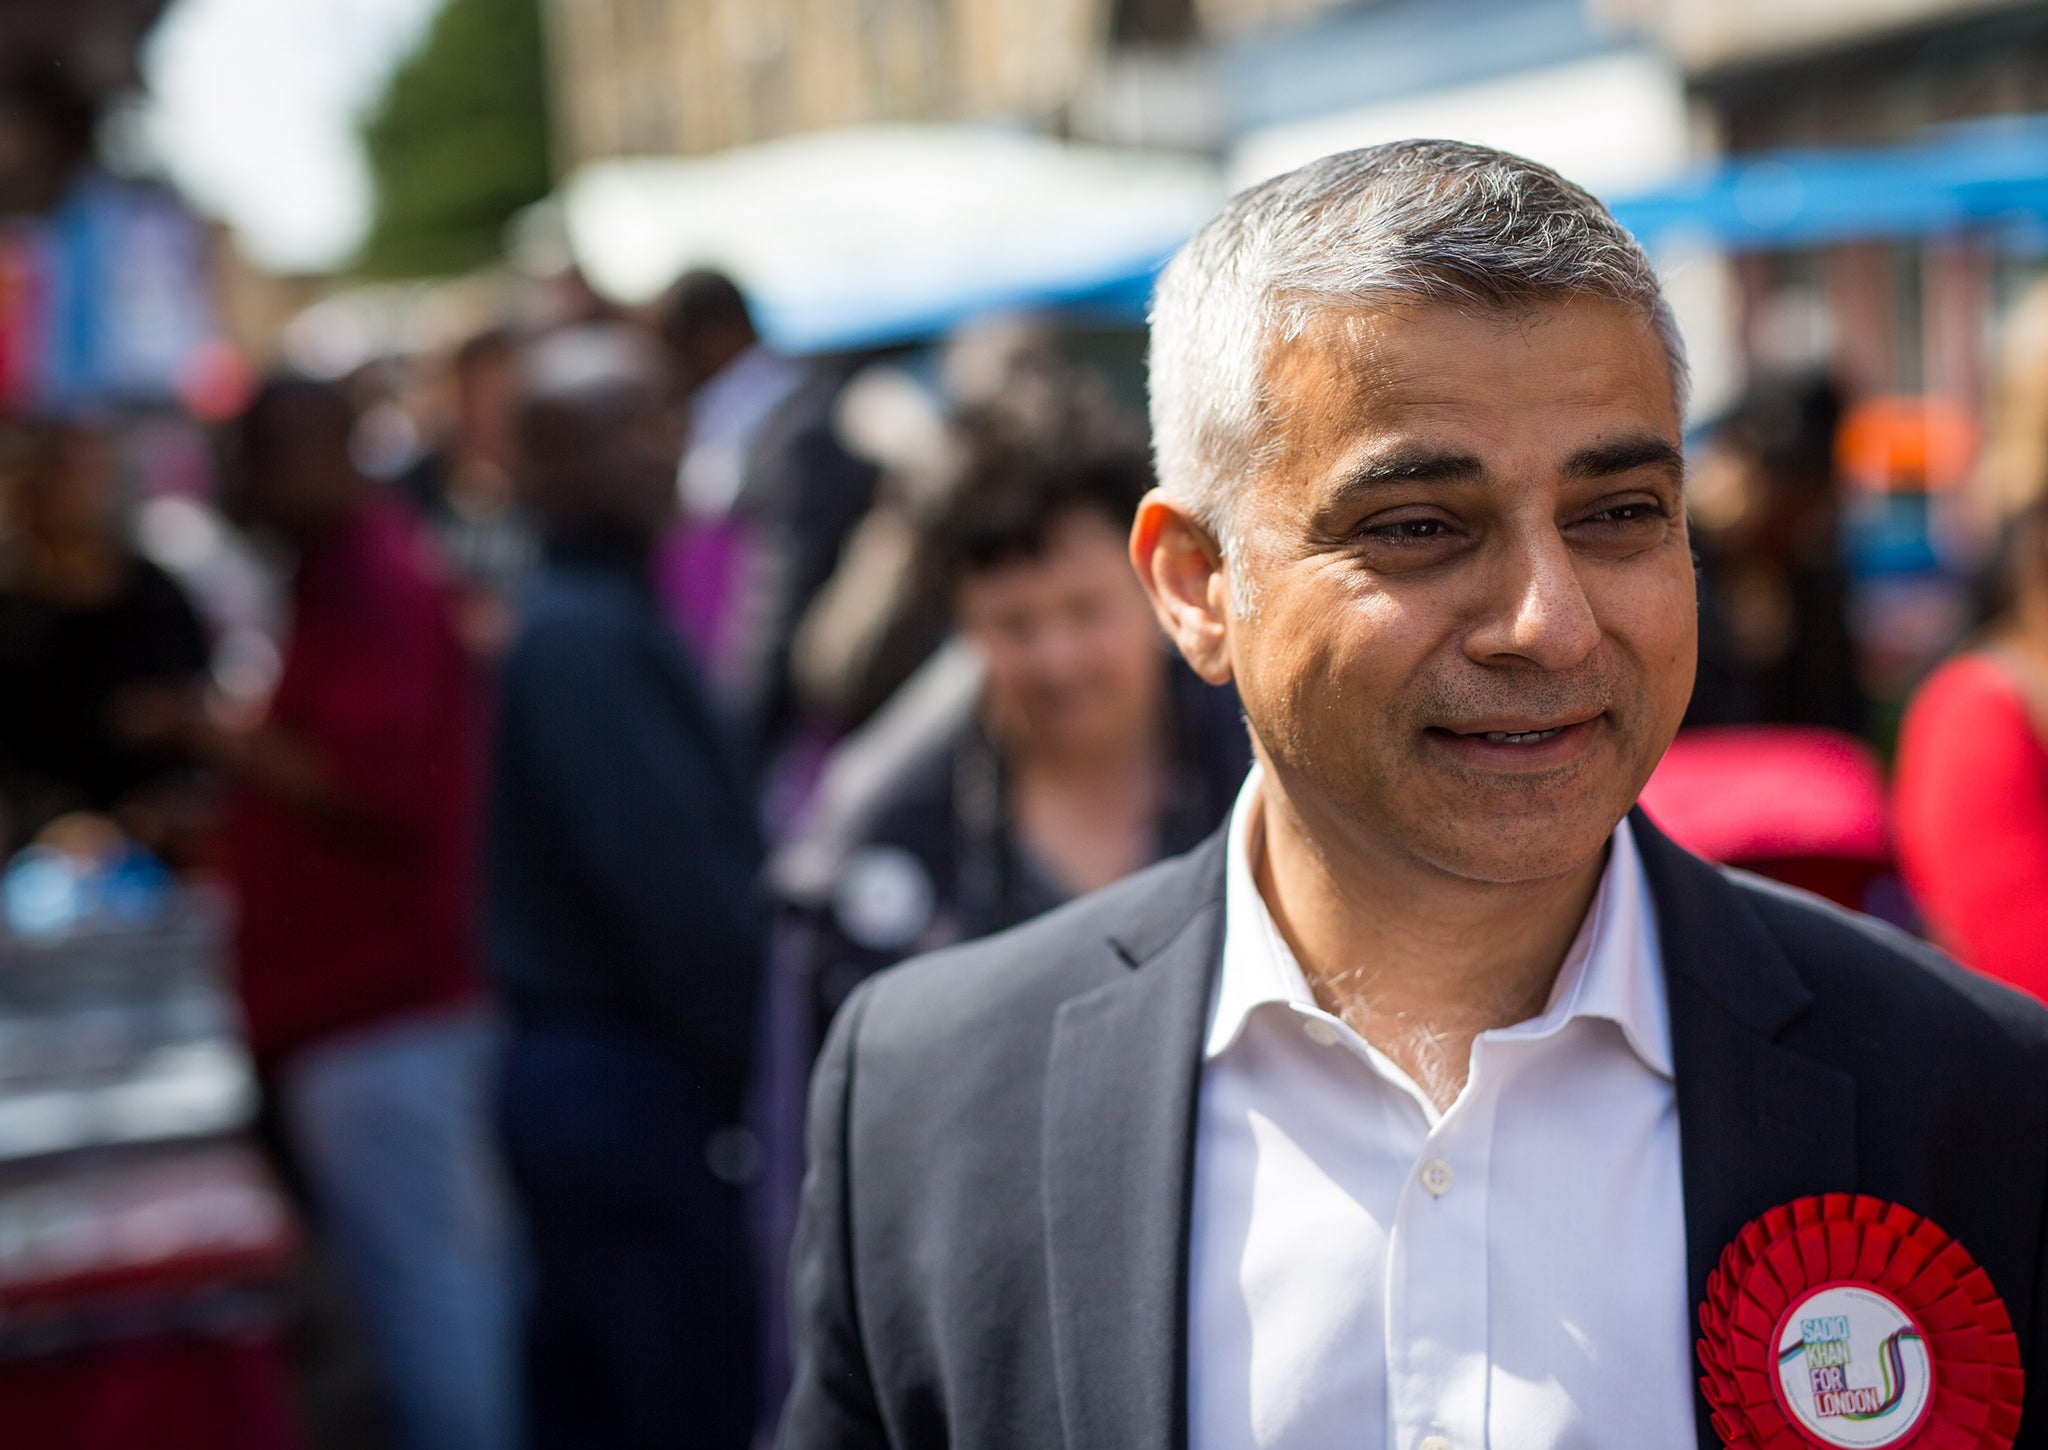 Labour's London Mayoral candidate Sadiq Khan and member of Parliament for Tooting walks through East Street Market in Walworth on May 4, 2016 in London